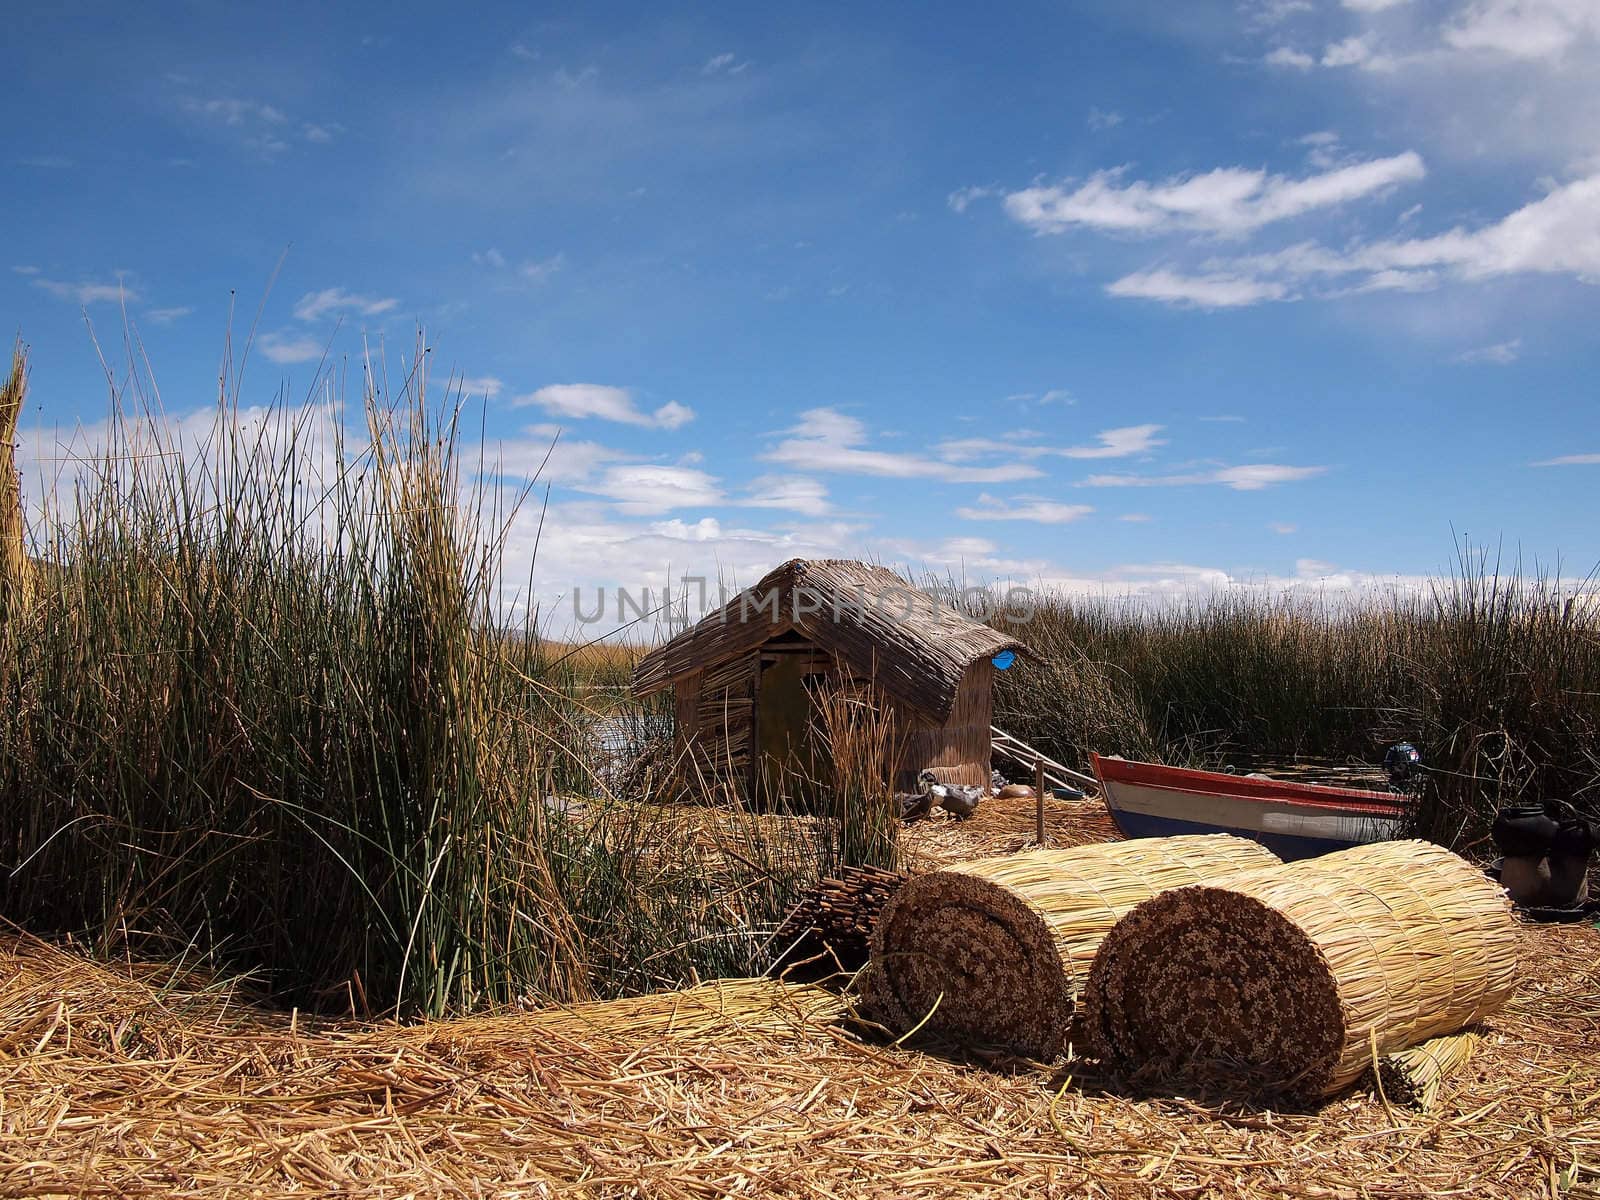 Hut made of reed and lots of drying reed on one of the floating Uros islands inside Lake Titicaca, Peru. The Uros islands are made of reed and they float on top of the lake.